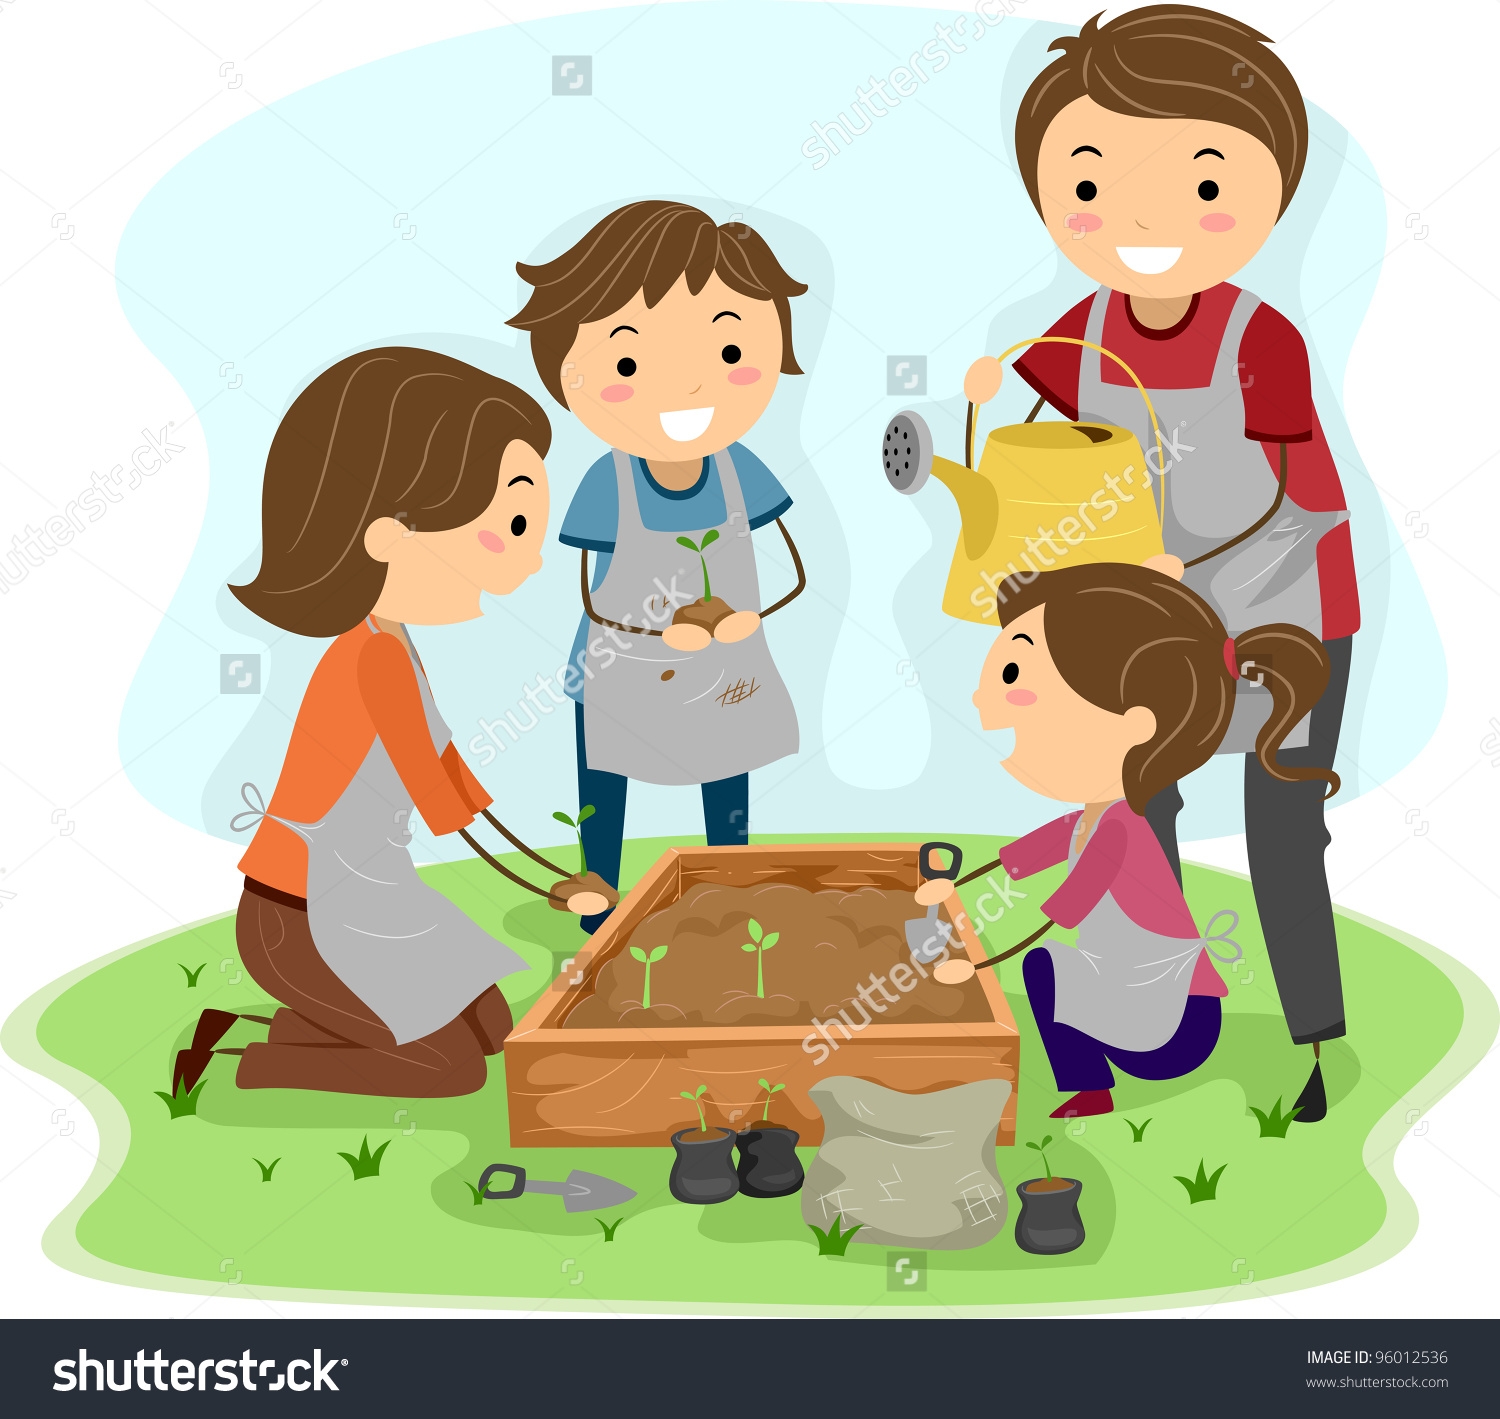 Family Cleaning Together Clipart.